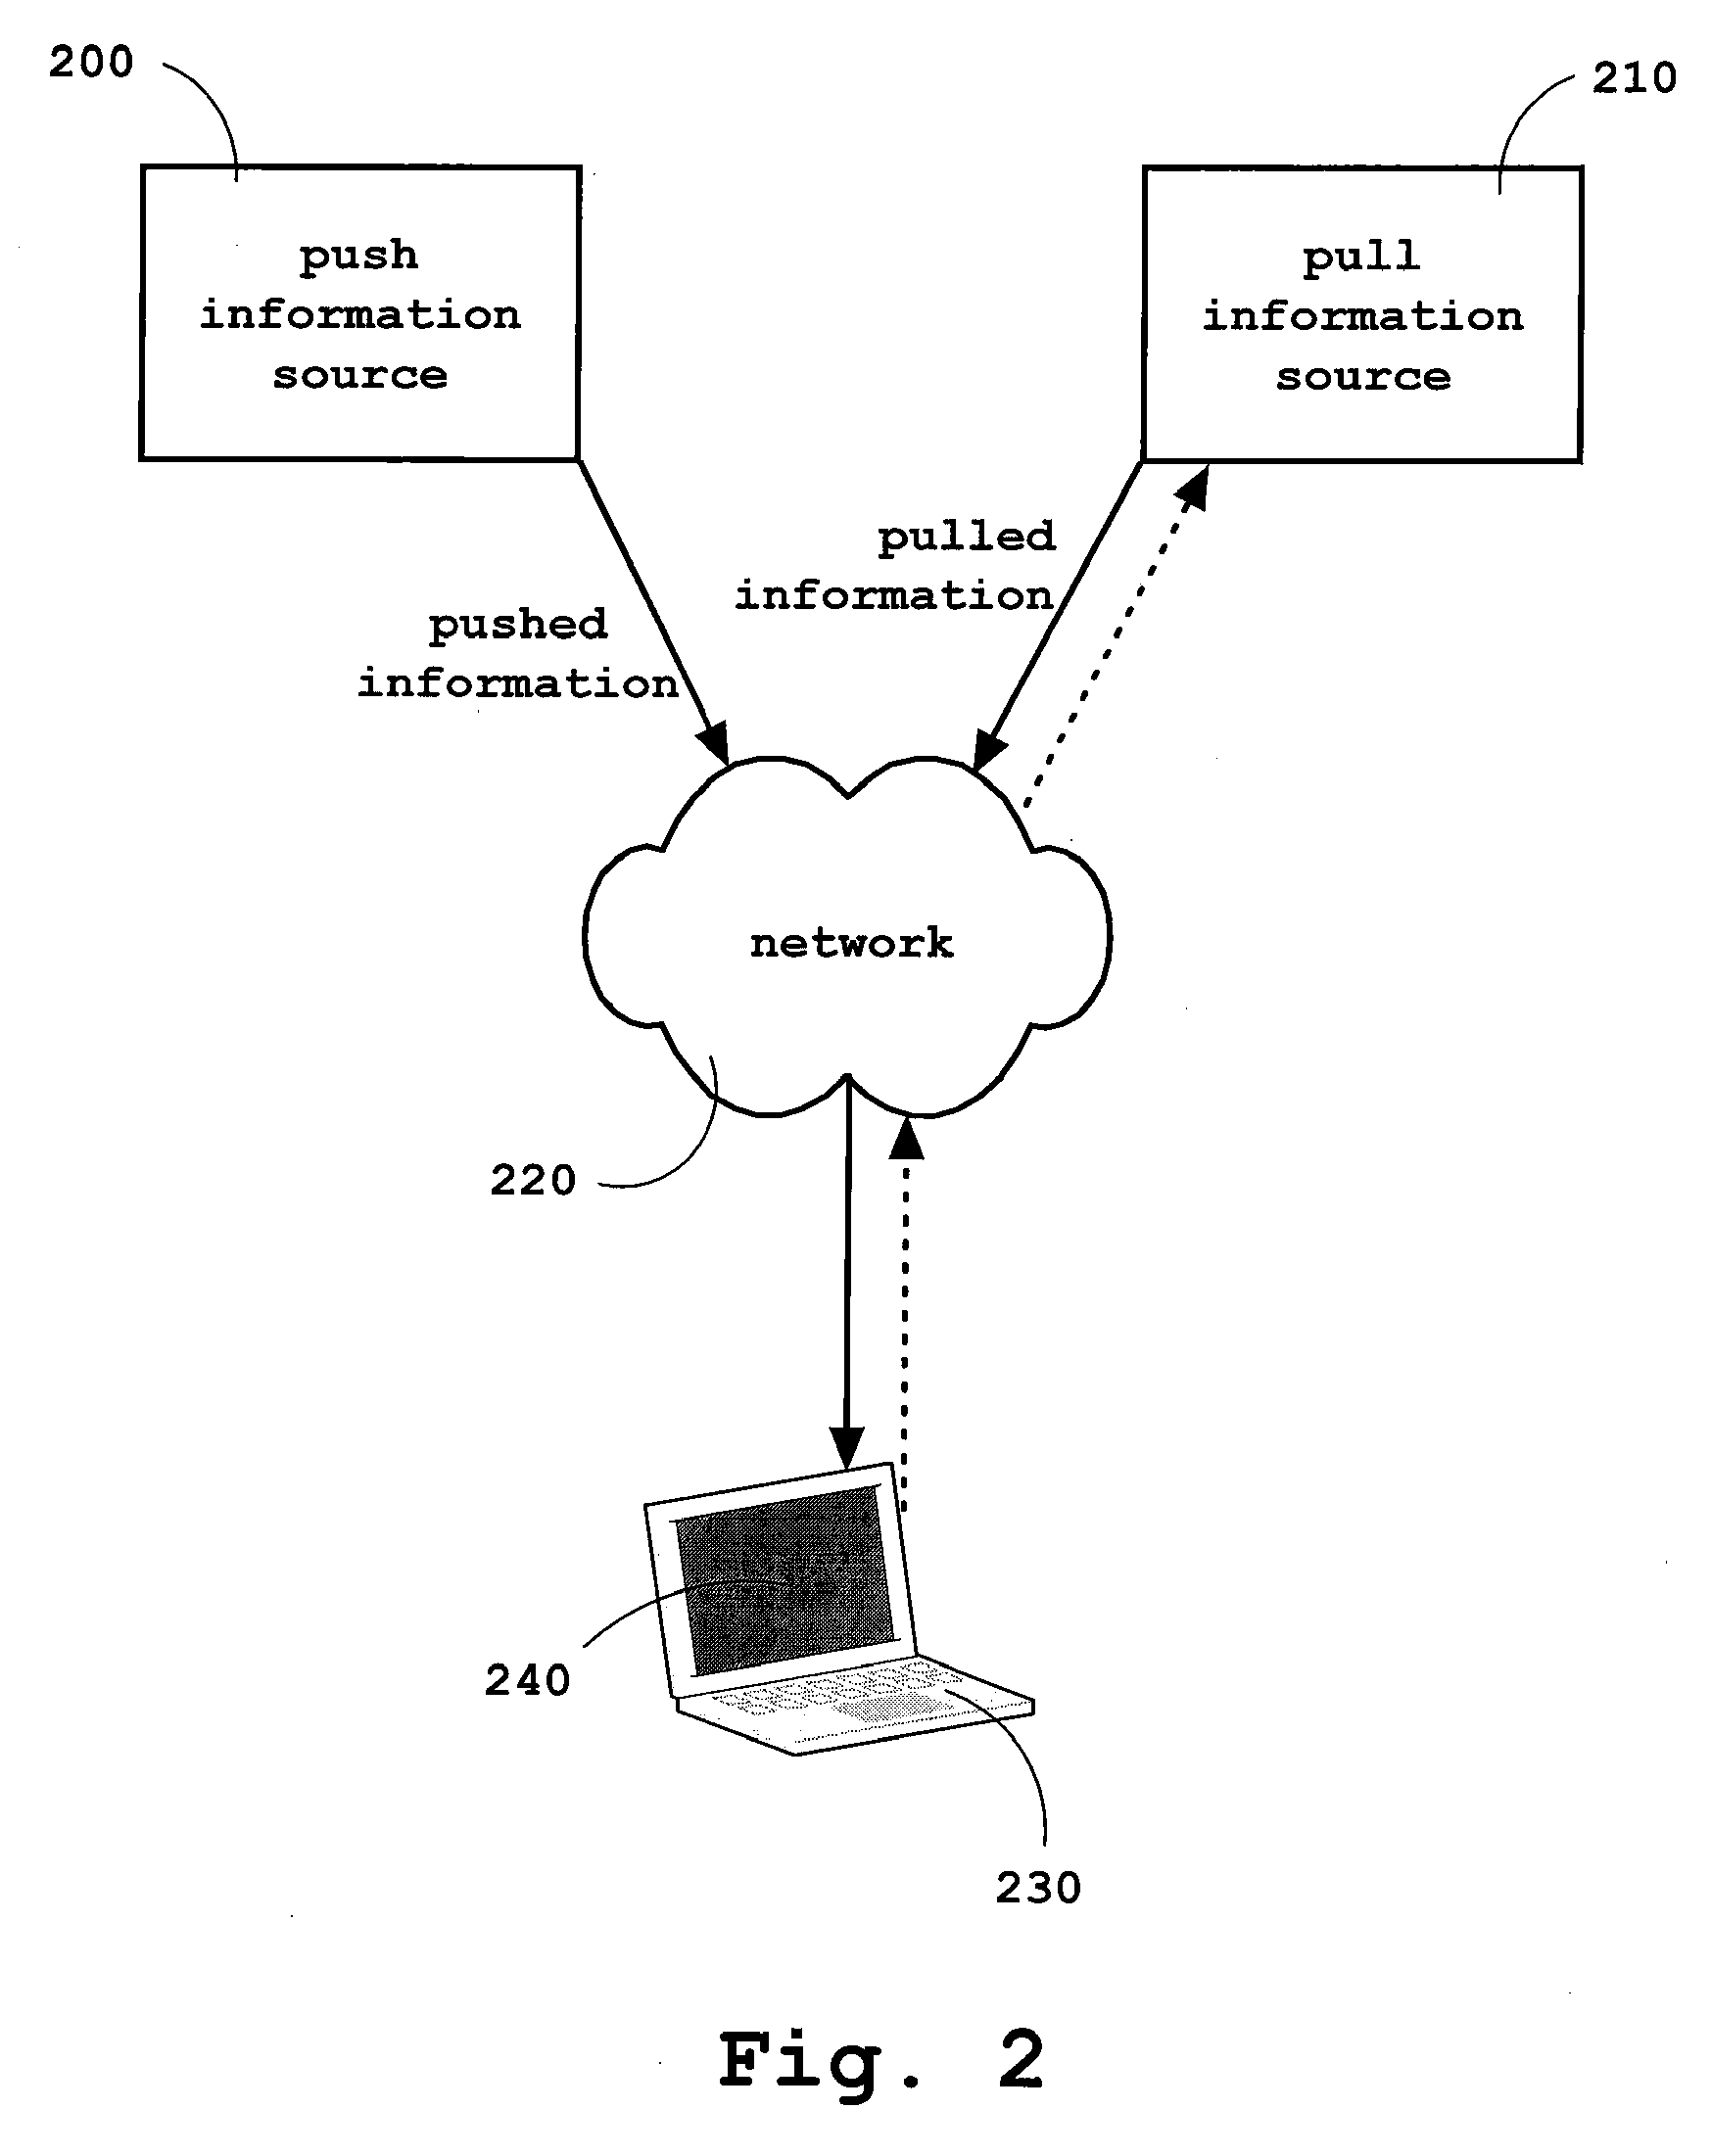 Pushed and pulled information display on a computing device